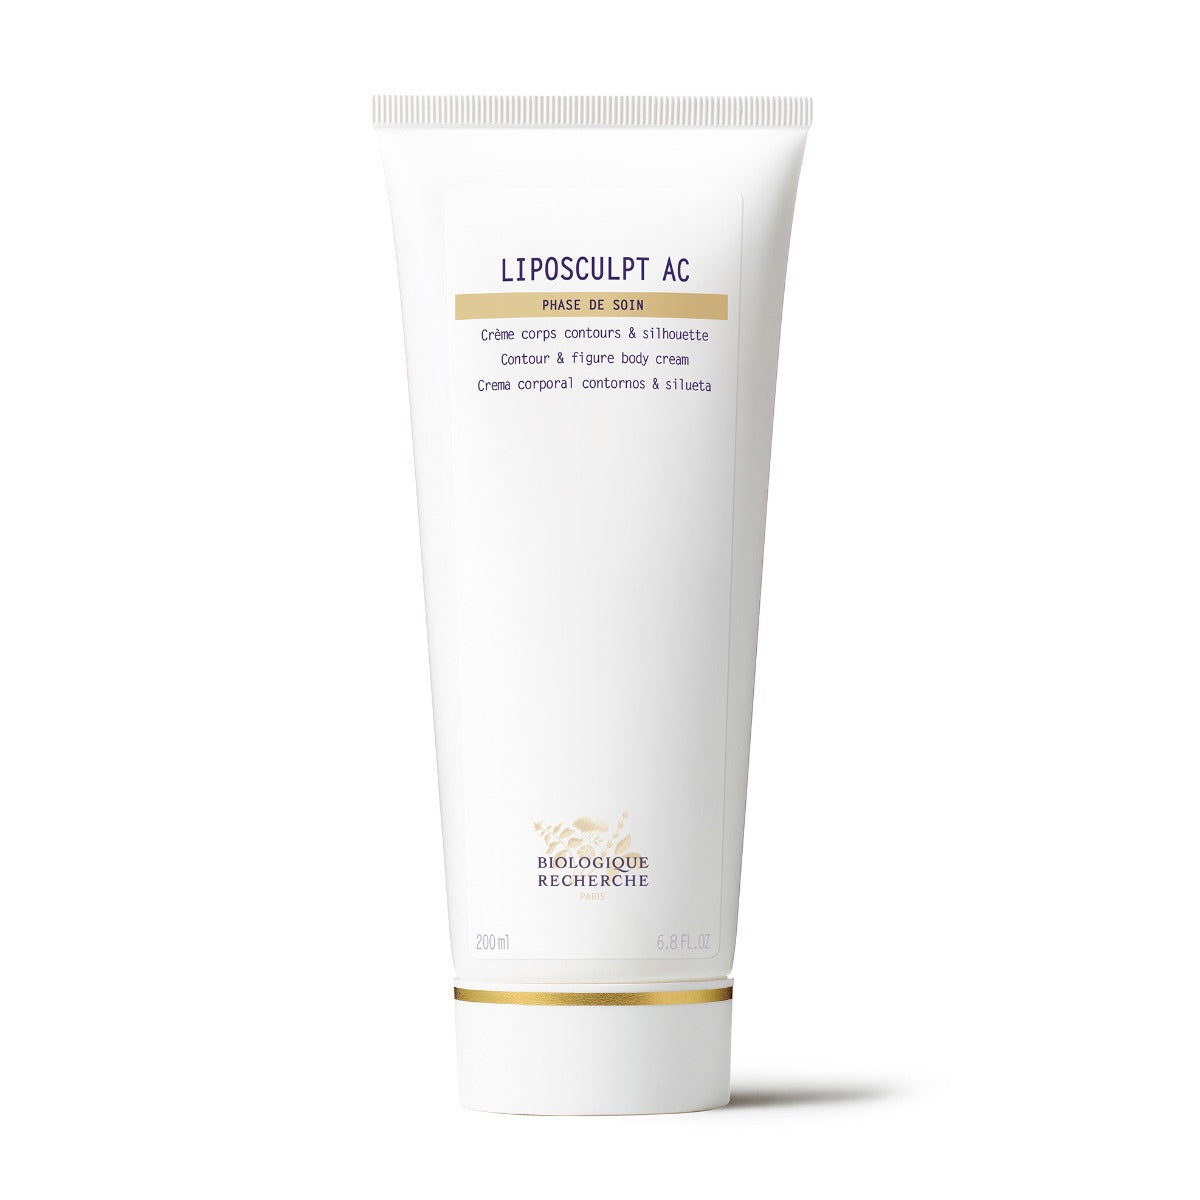 Creme Liposculpt AC Firming and Refining Cream For Cellulite